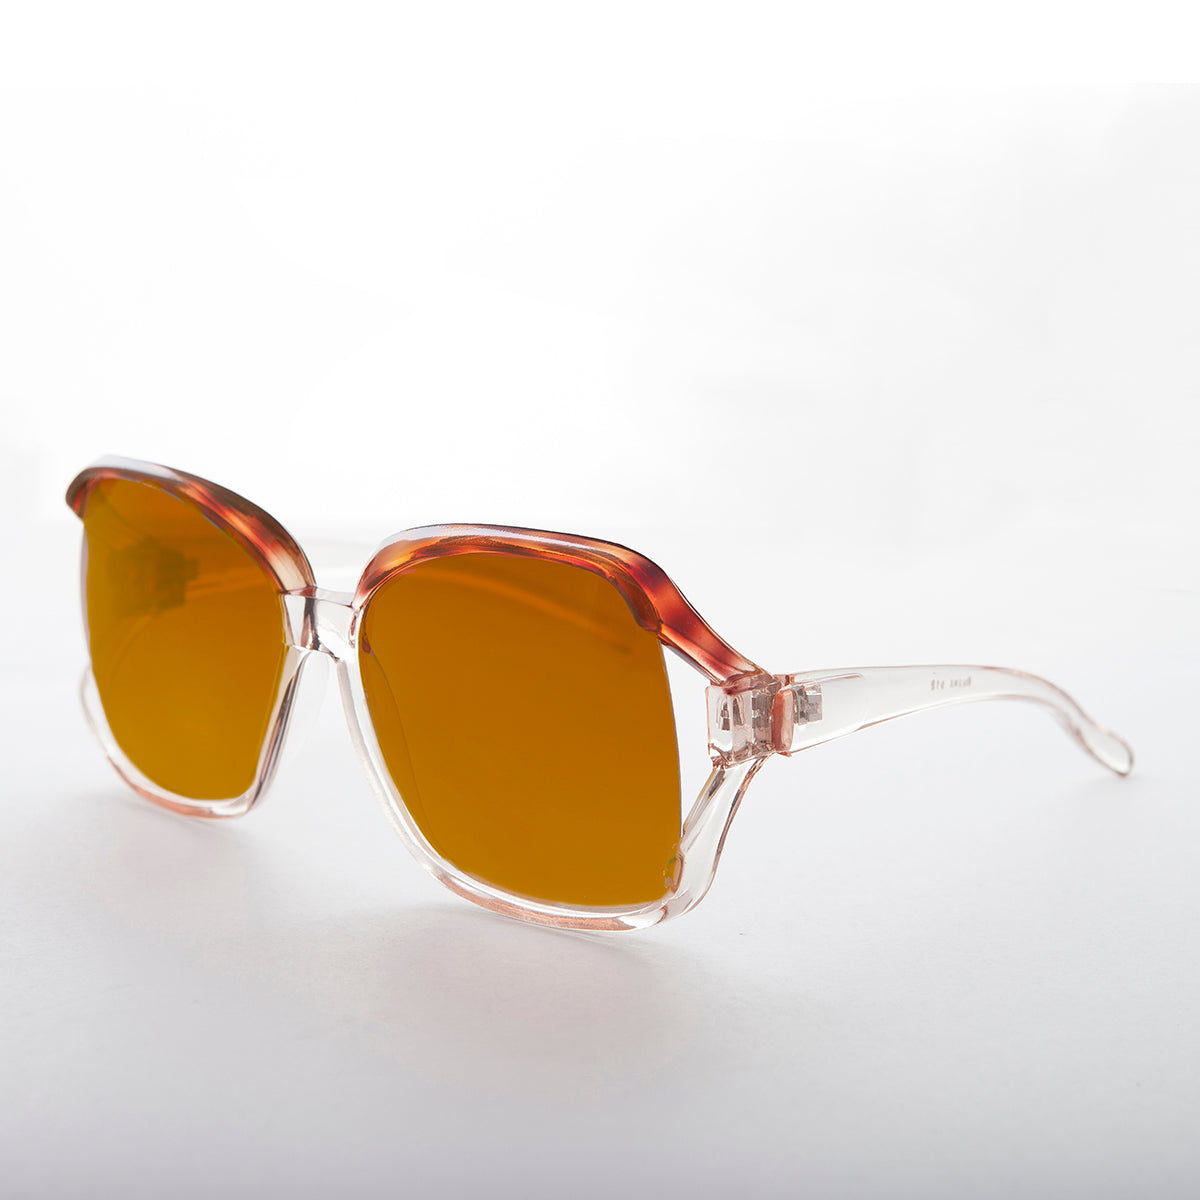 Oversized Square Clear Frame Vintage Sunglass